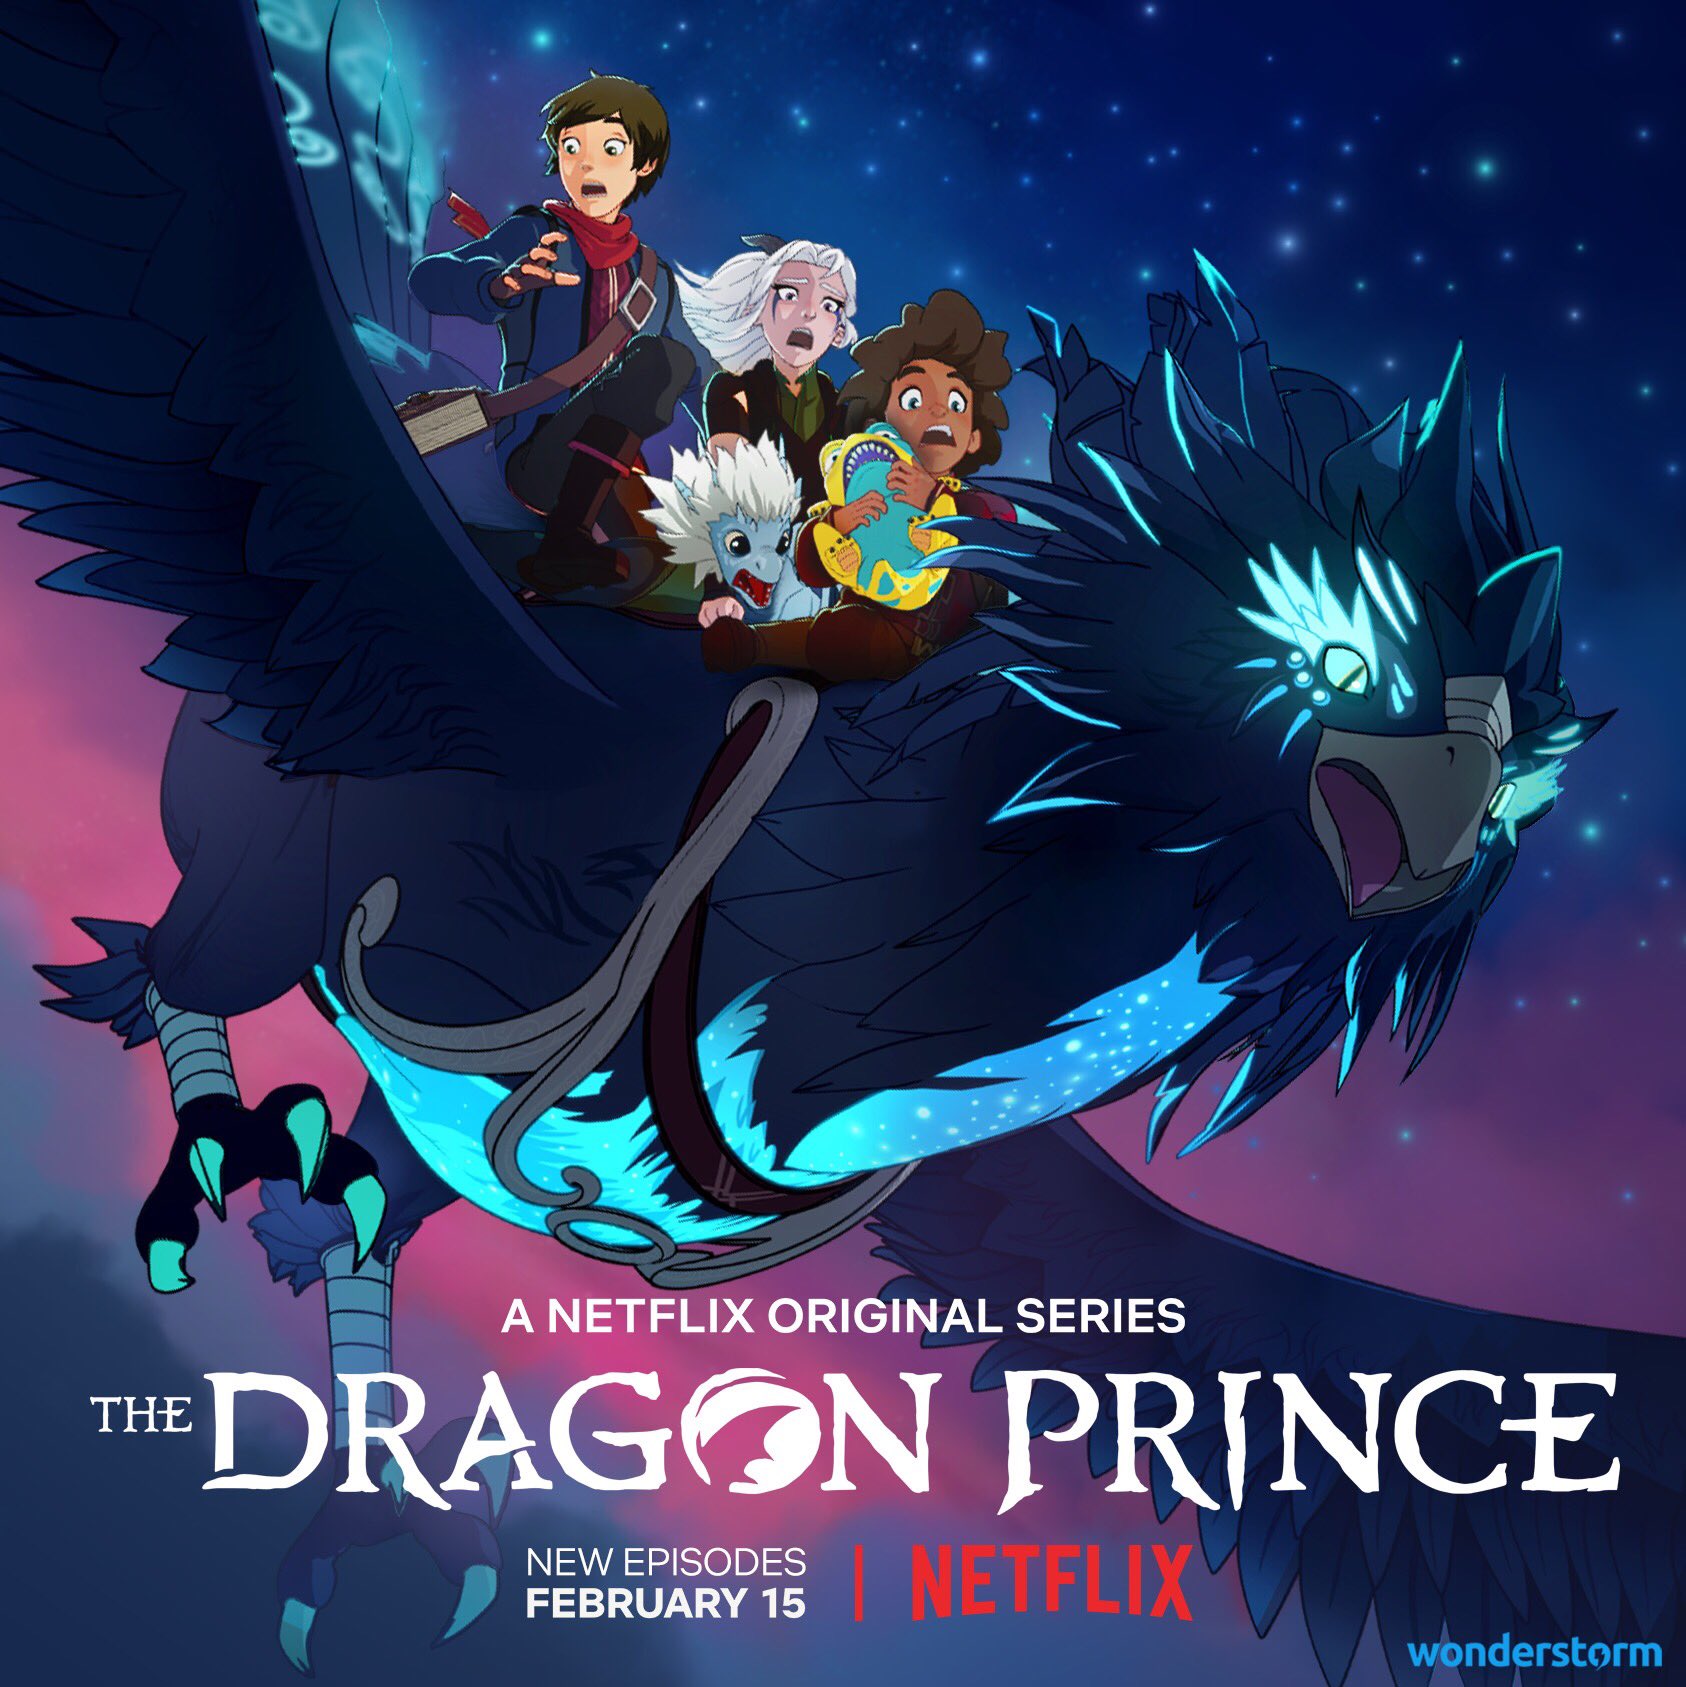 The Dragon Prince Season 2 Trailer and Release Date Den of Geek